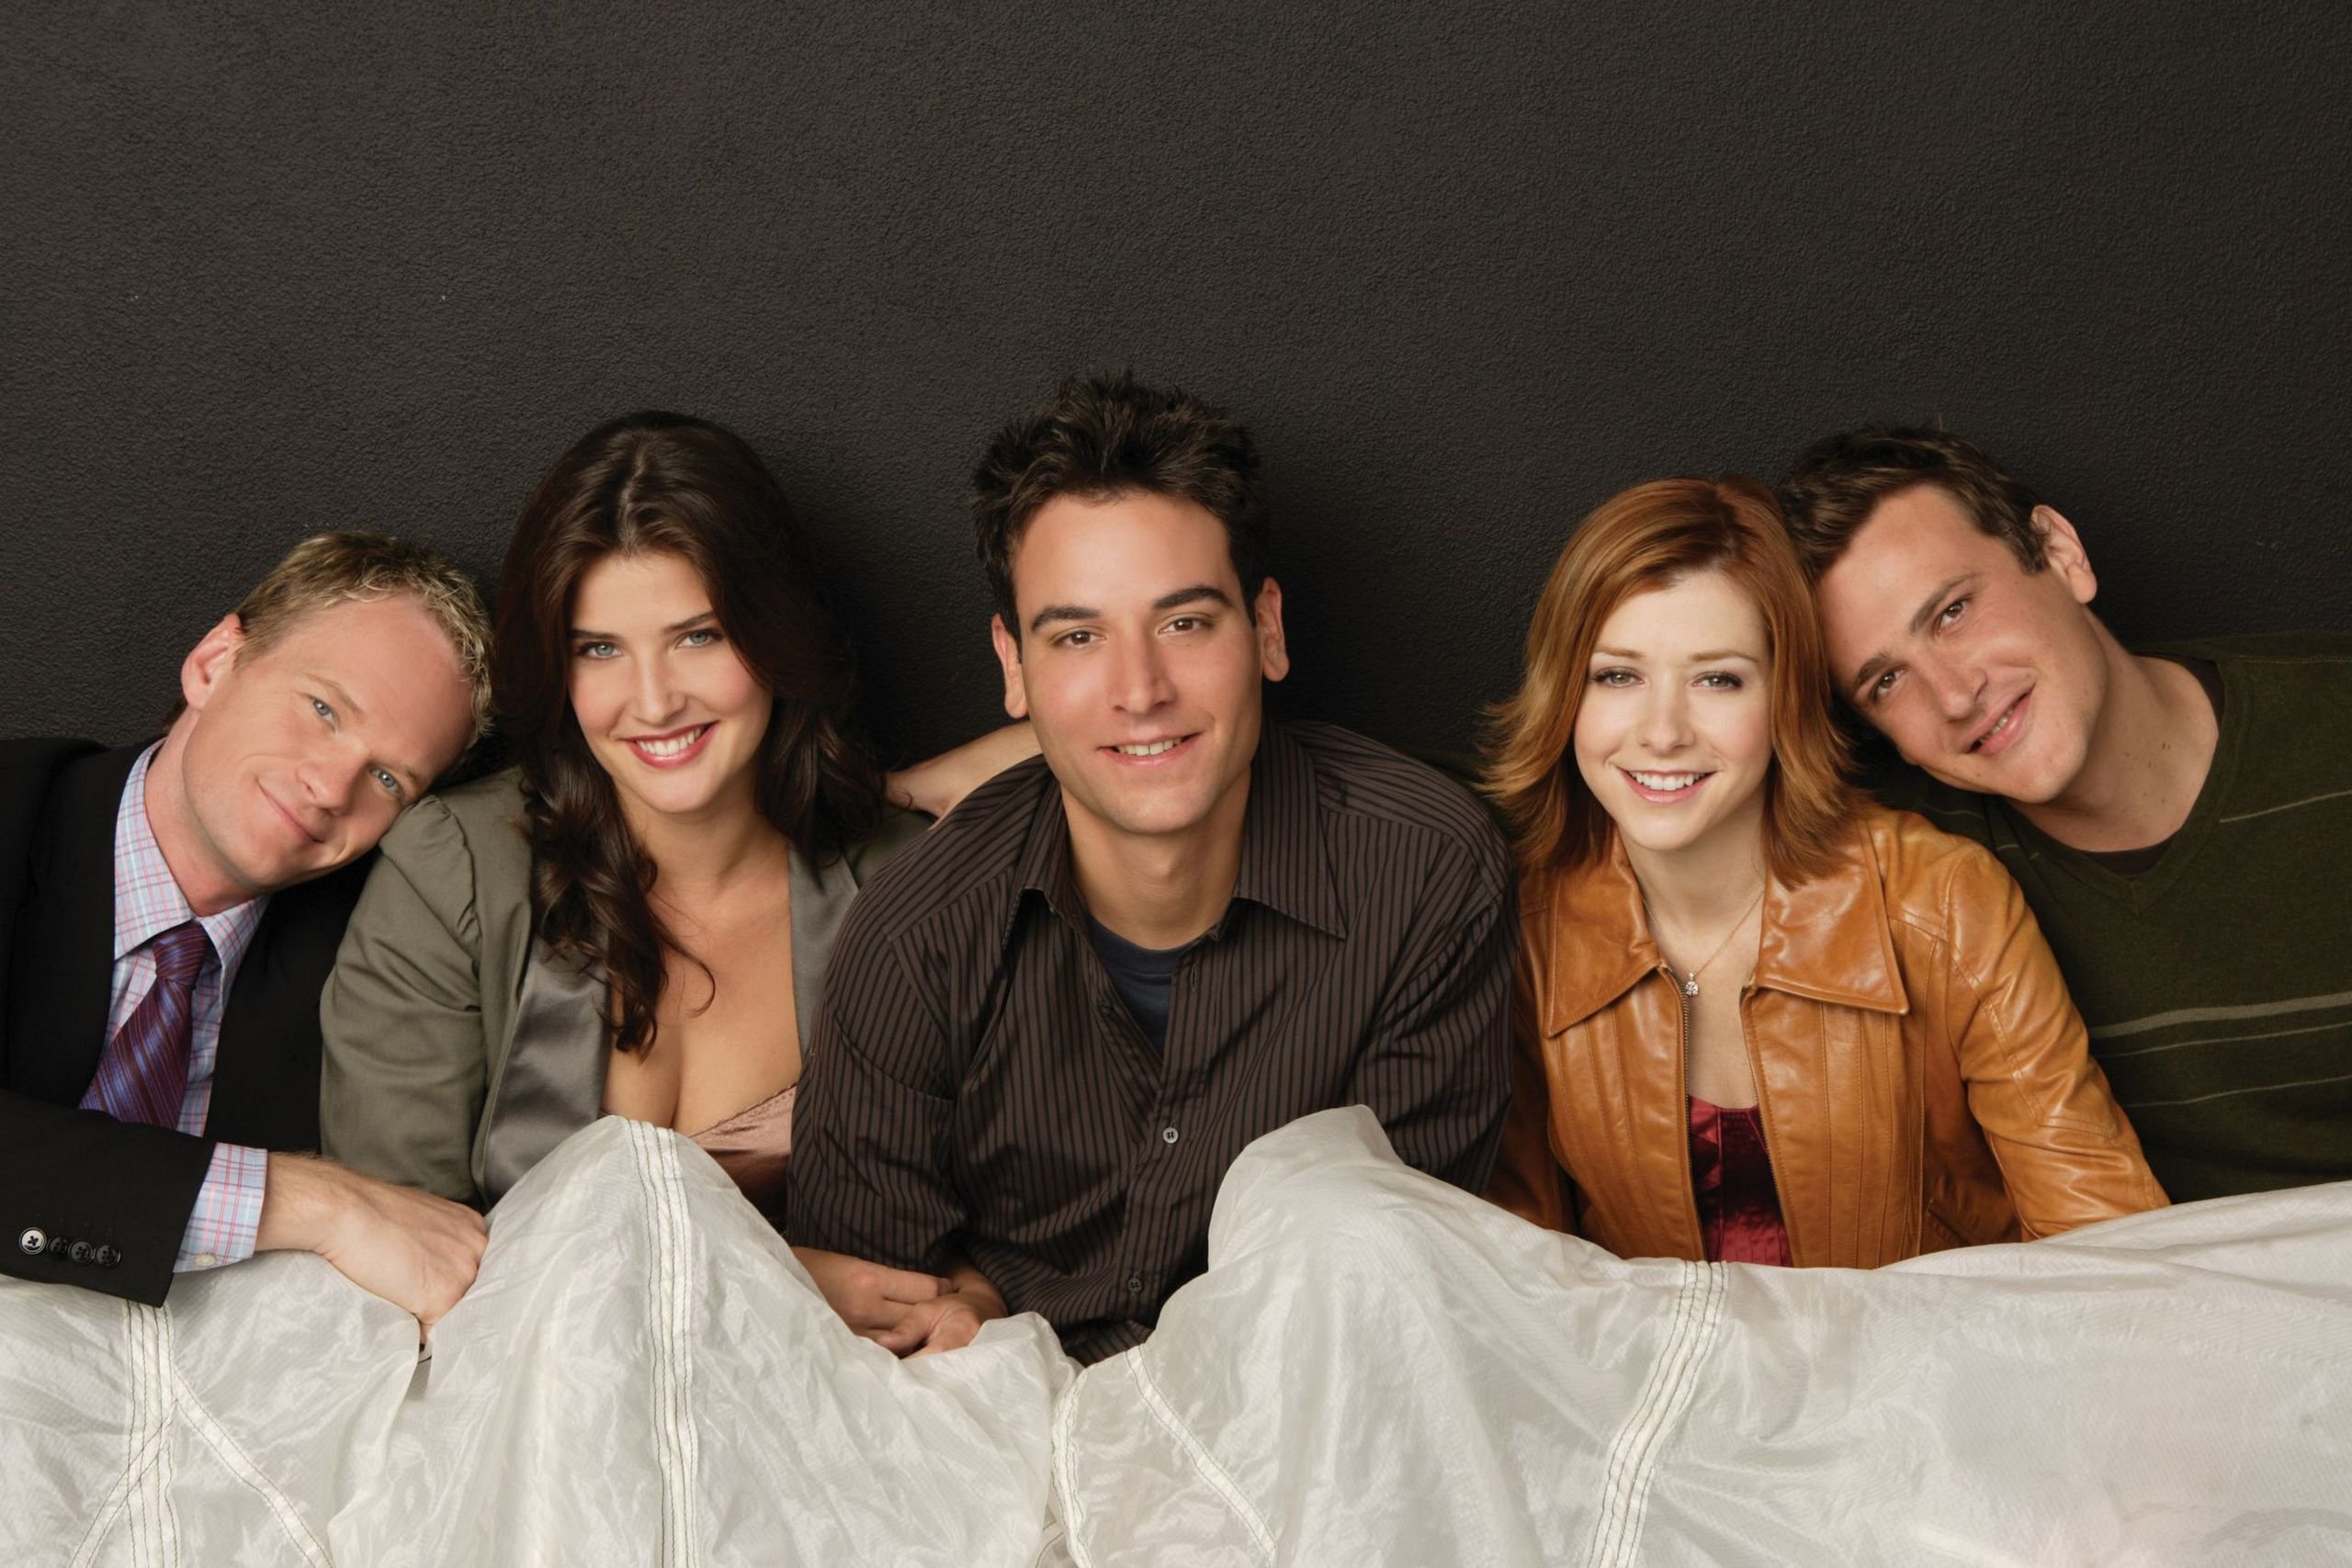 how i met your mother, Comedy, Series, Television, How, Met